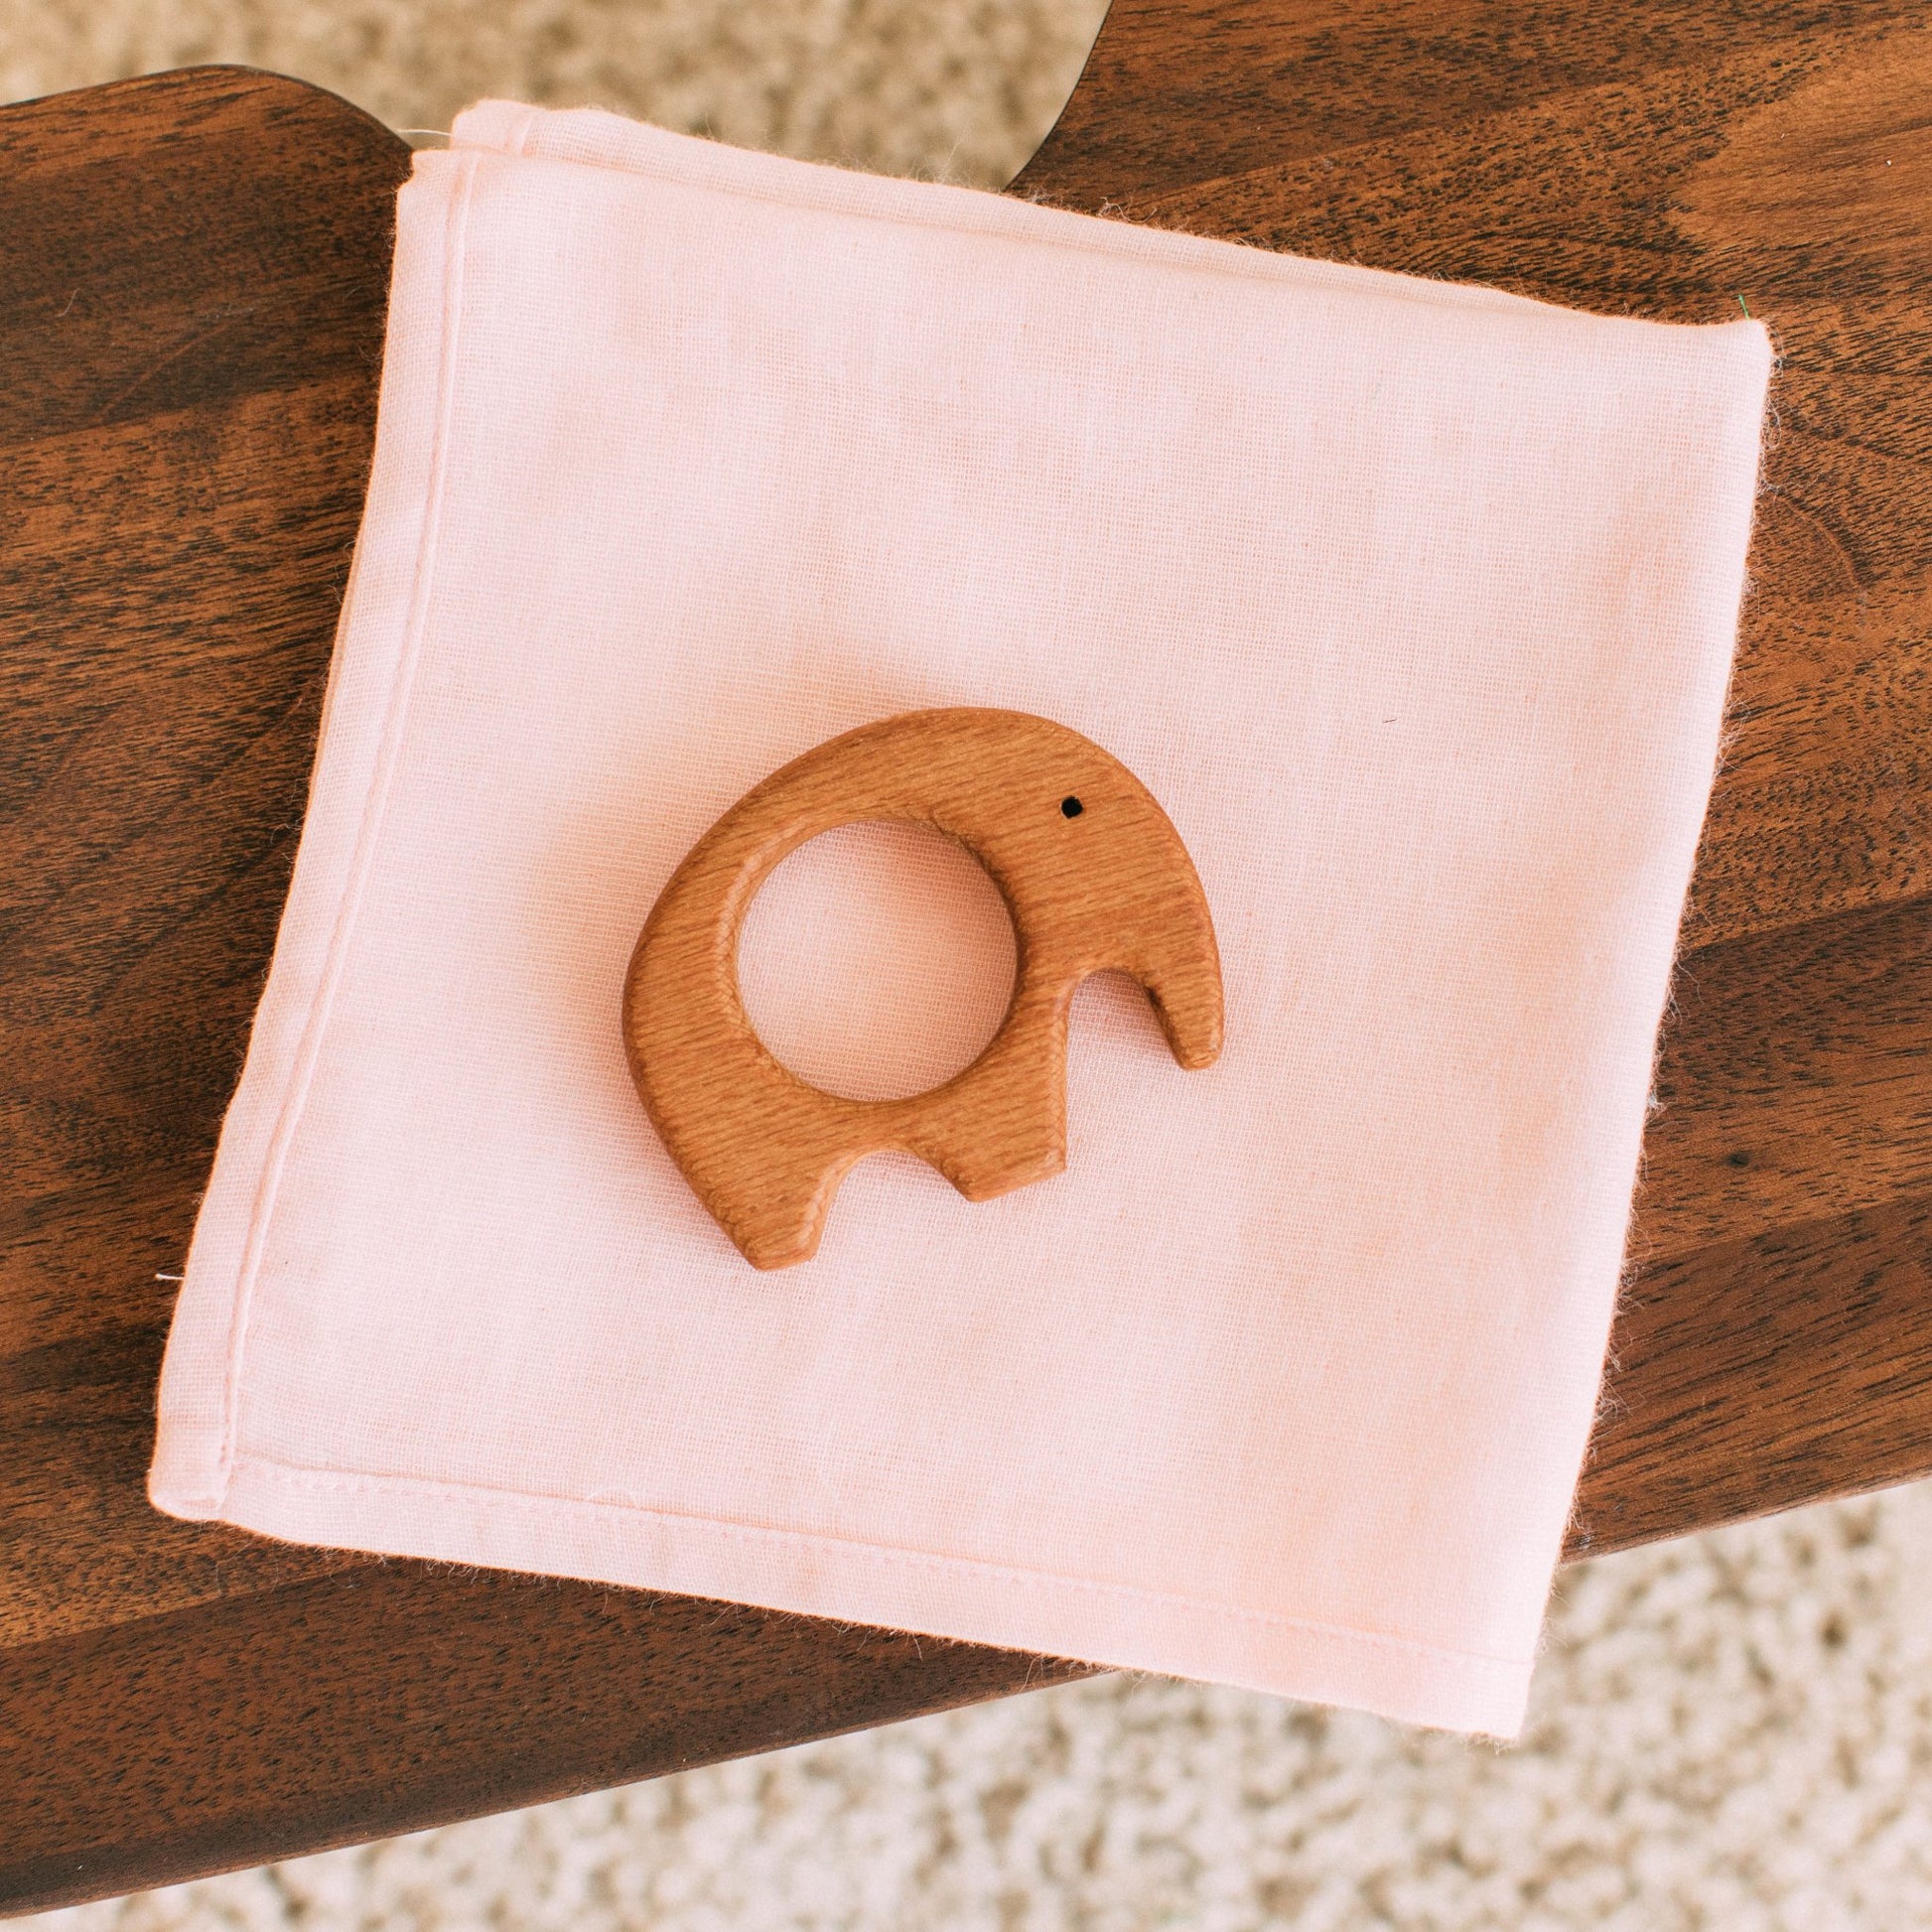 Wooden Elephant Teether by Avdar - Wood Wood Toys Canada's Favourite Montessori Toy Store